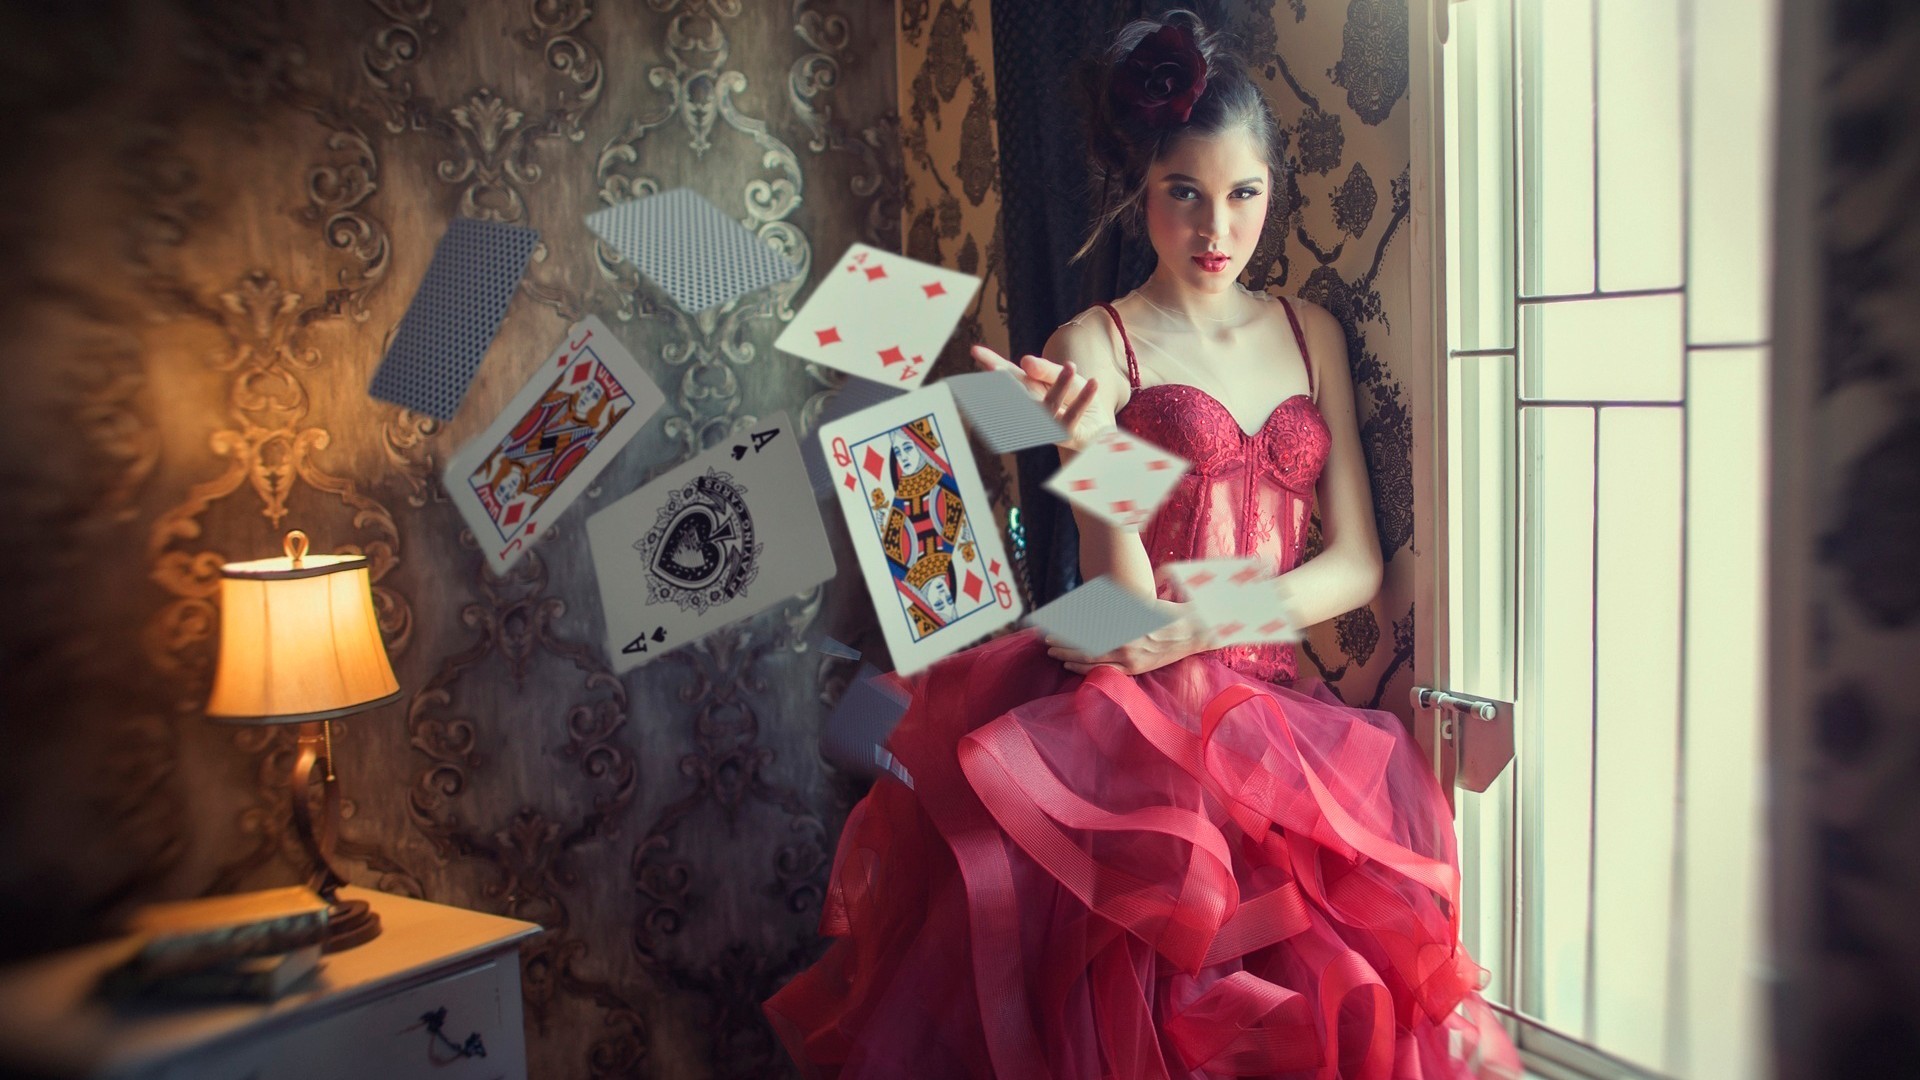 Photography Red Dress Room Playing Cards Ace Of Spades Women Model Women Indoors Dress Lamp Dark Hai 1920x1080